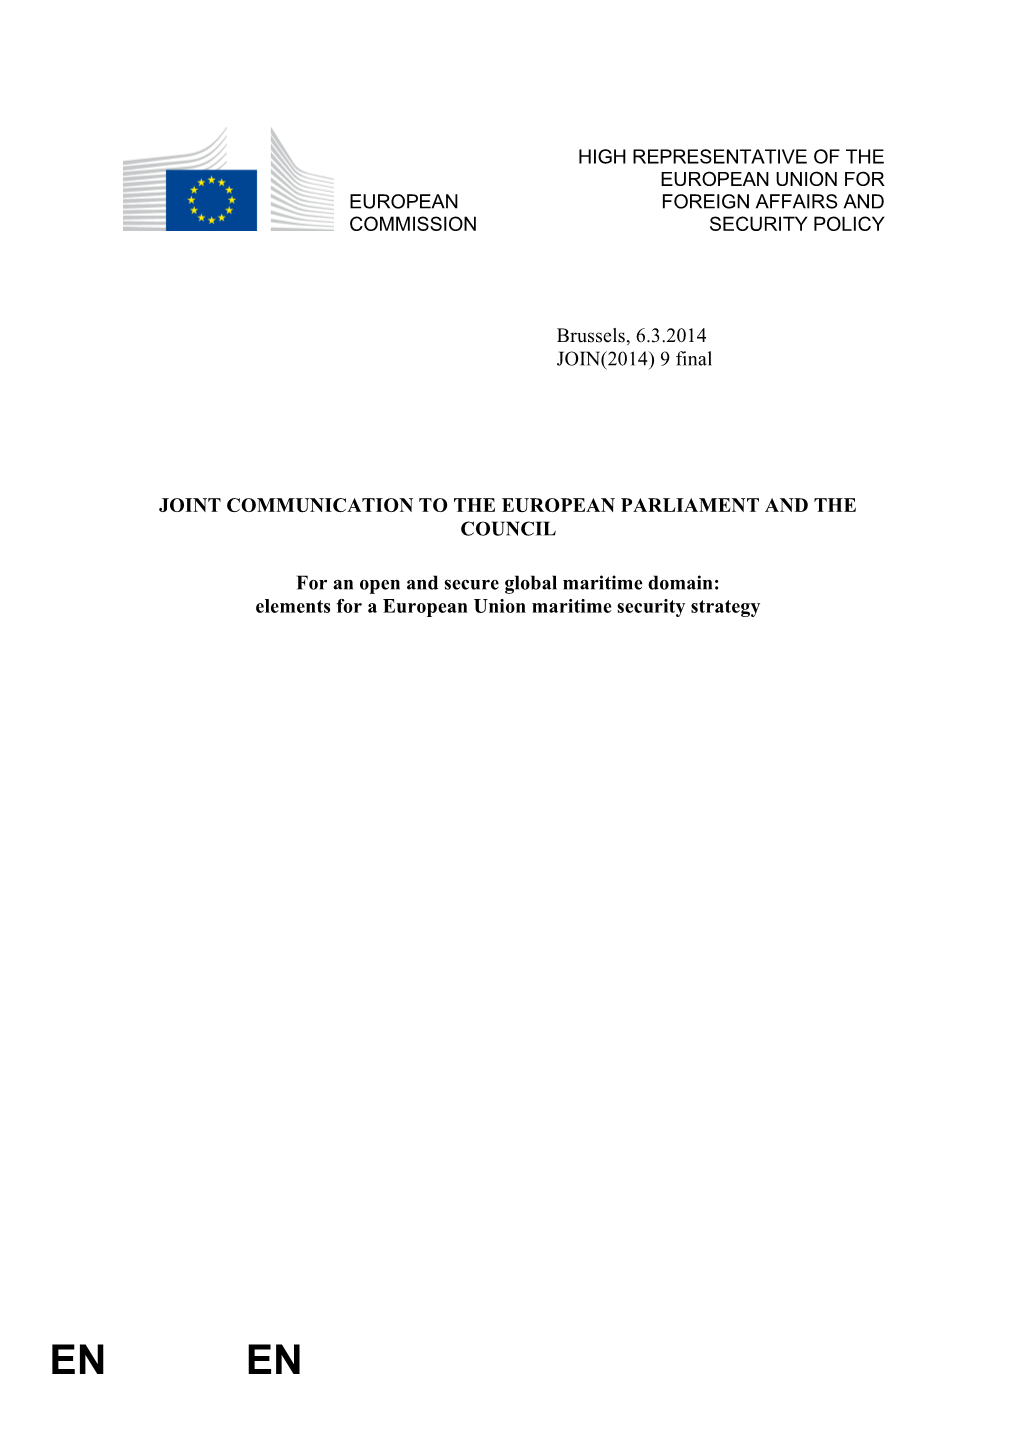 Joint Communication to the European Parliament and the Council